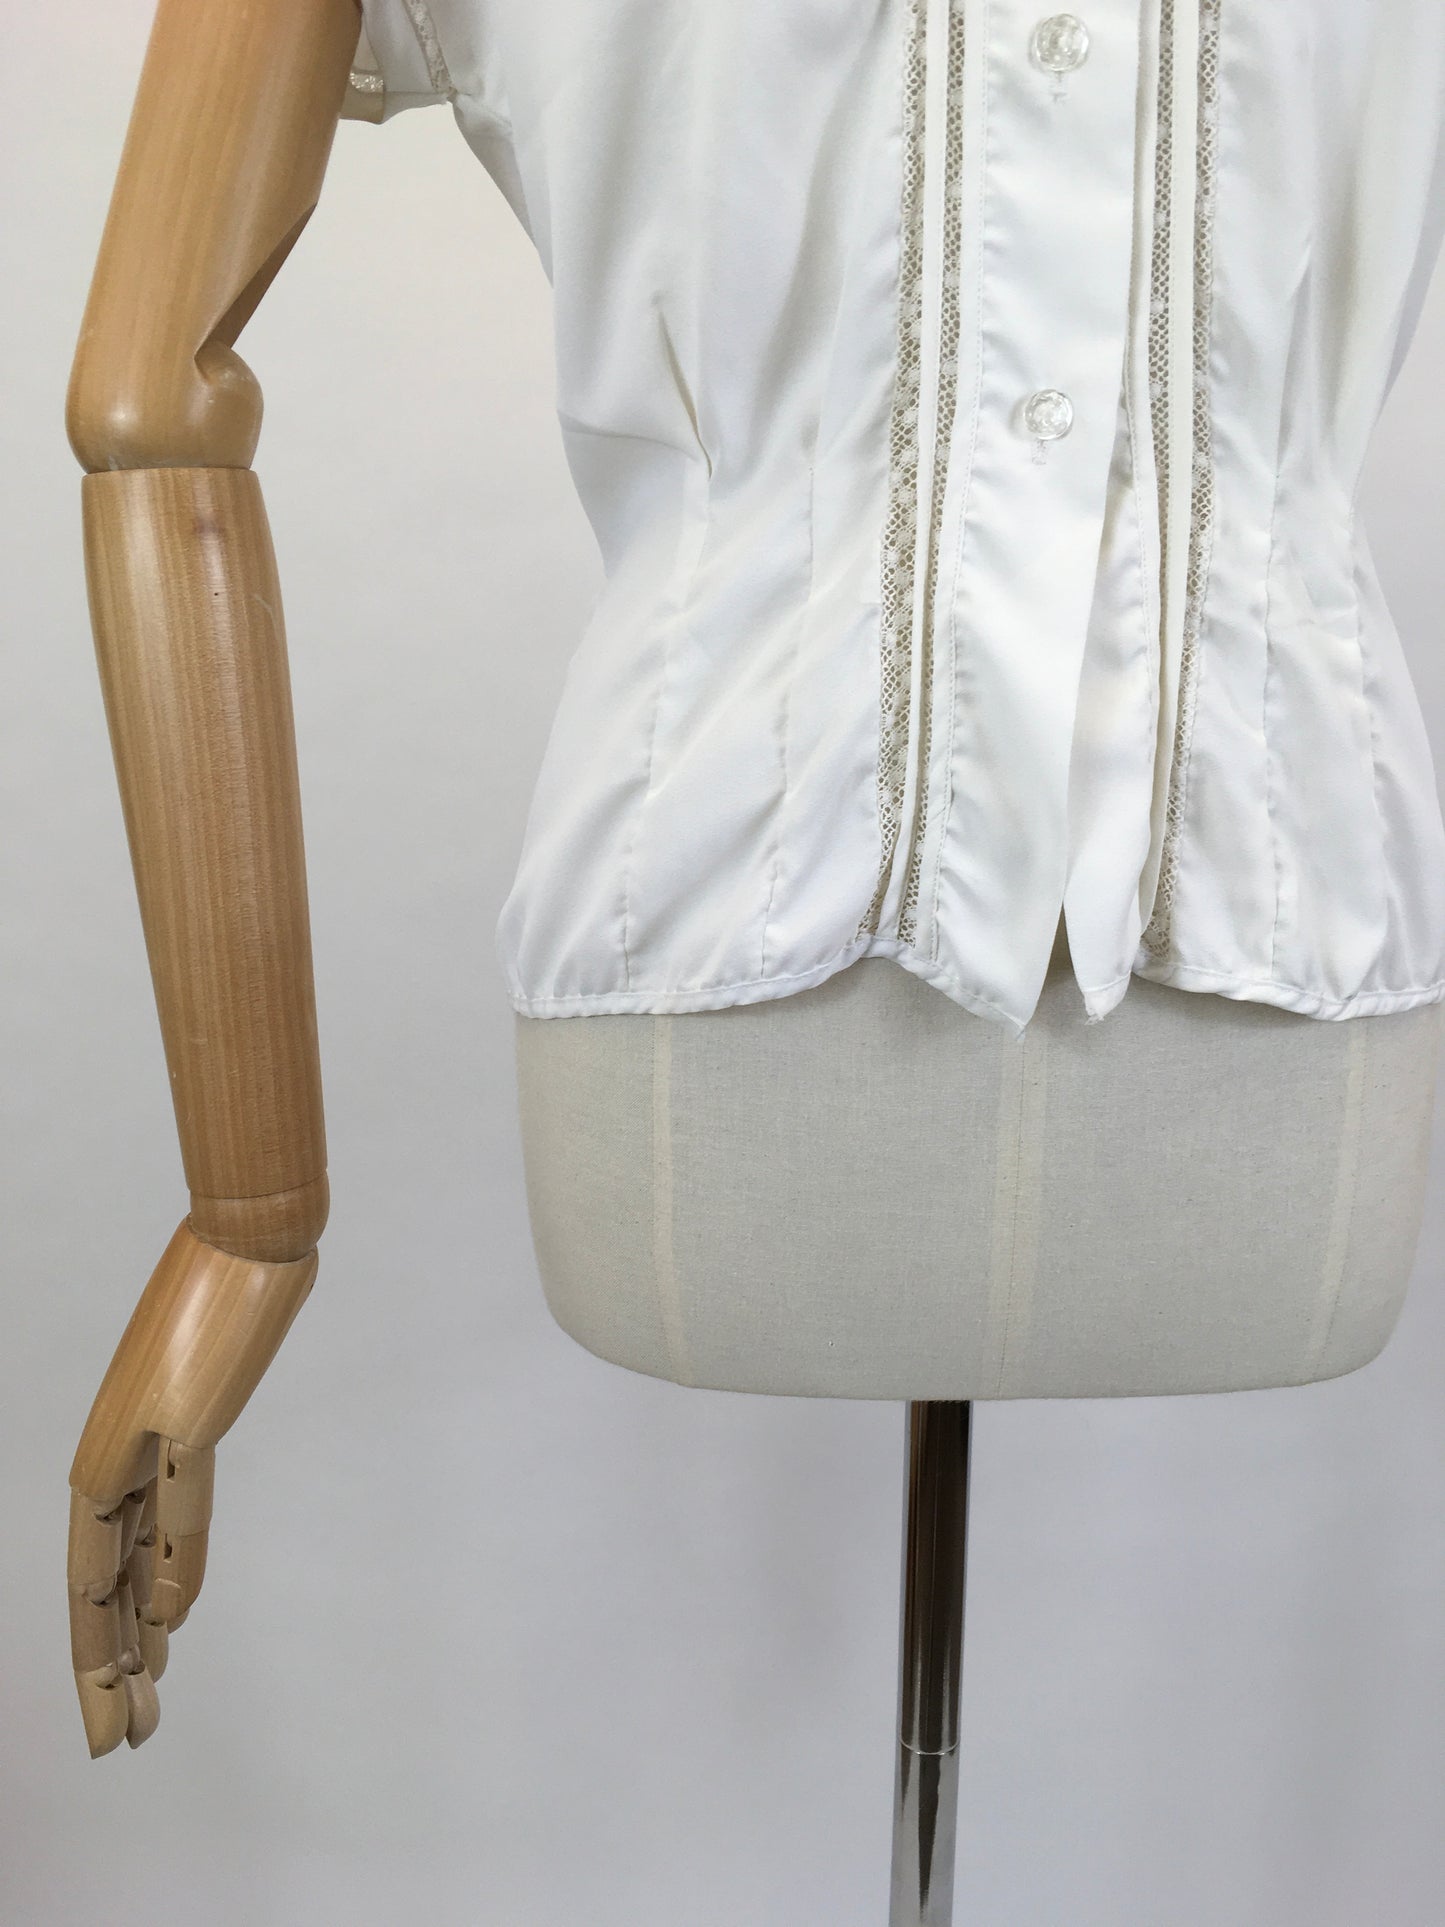 Original 1950’s ‘ Weber’ Blouse in Crisp White - Featuring Lace and Pintuck Detailing to the Bodice